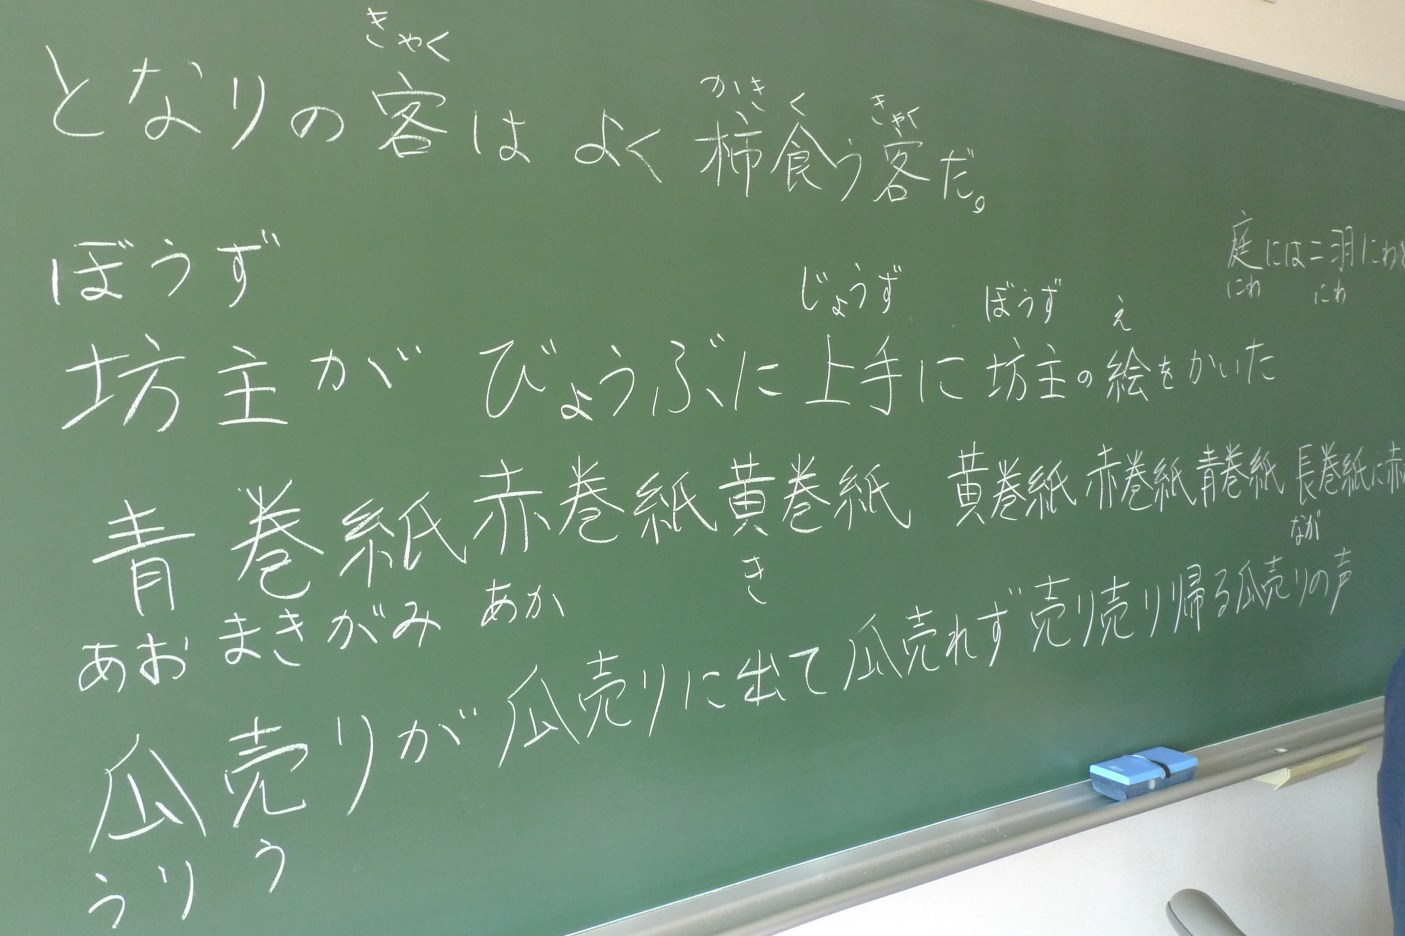 Reviewing tongue-twisters in class. (Try saying "aka-makigami ao-makigami ki-makigami" 3 times fast. :)